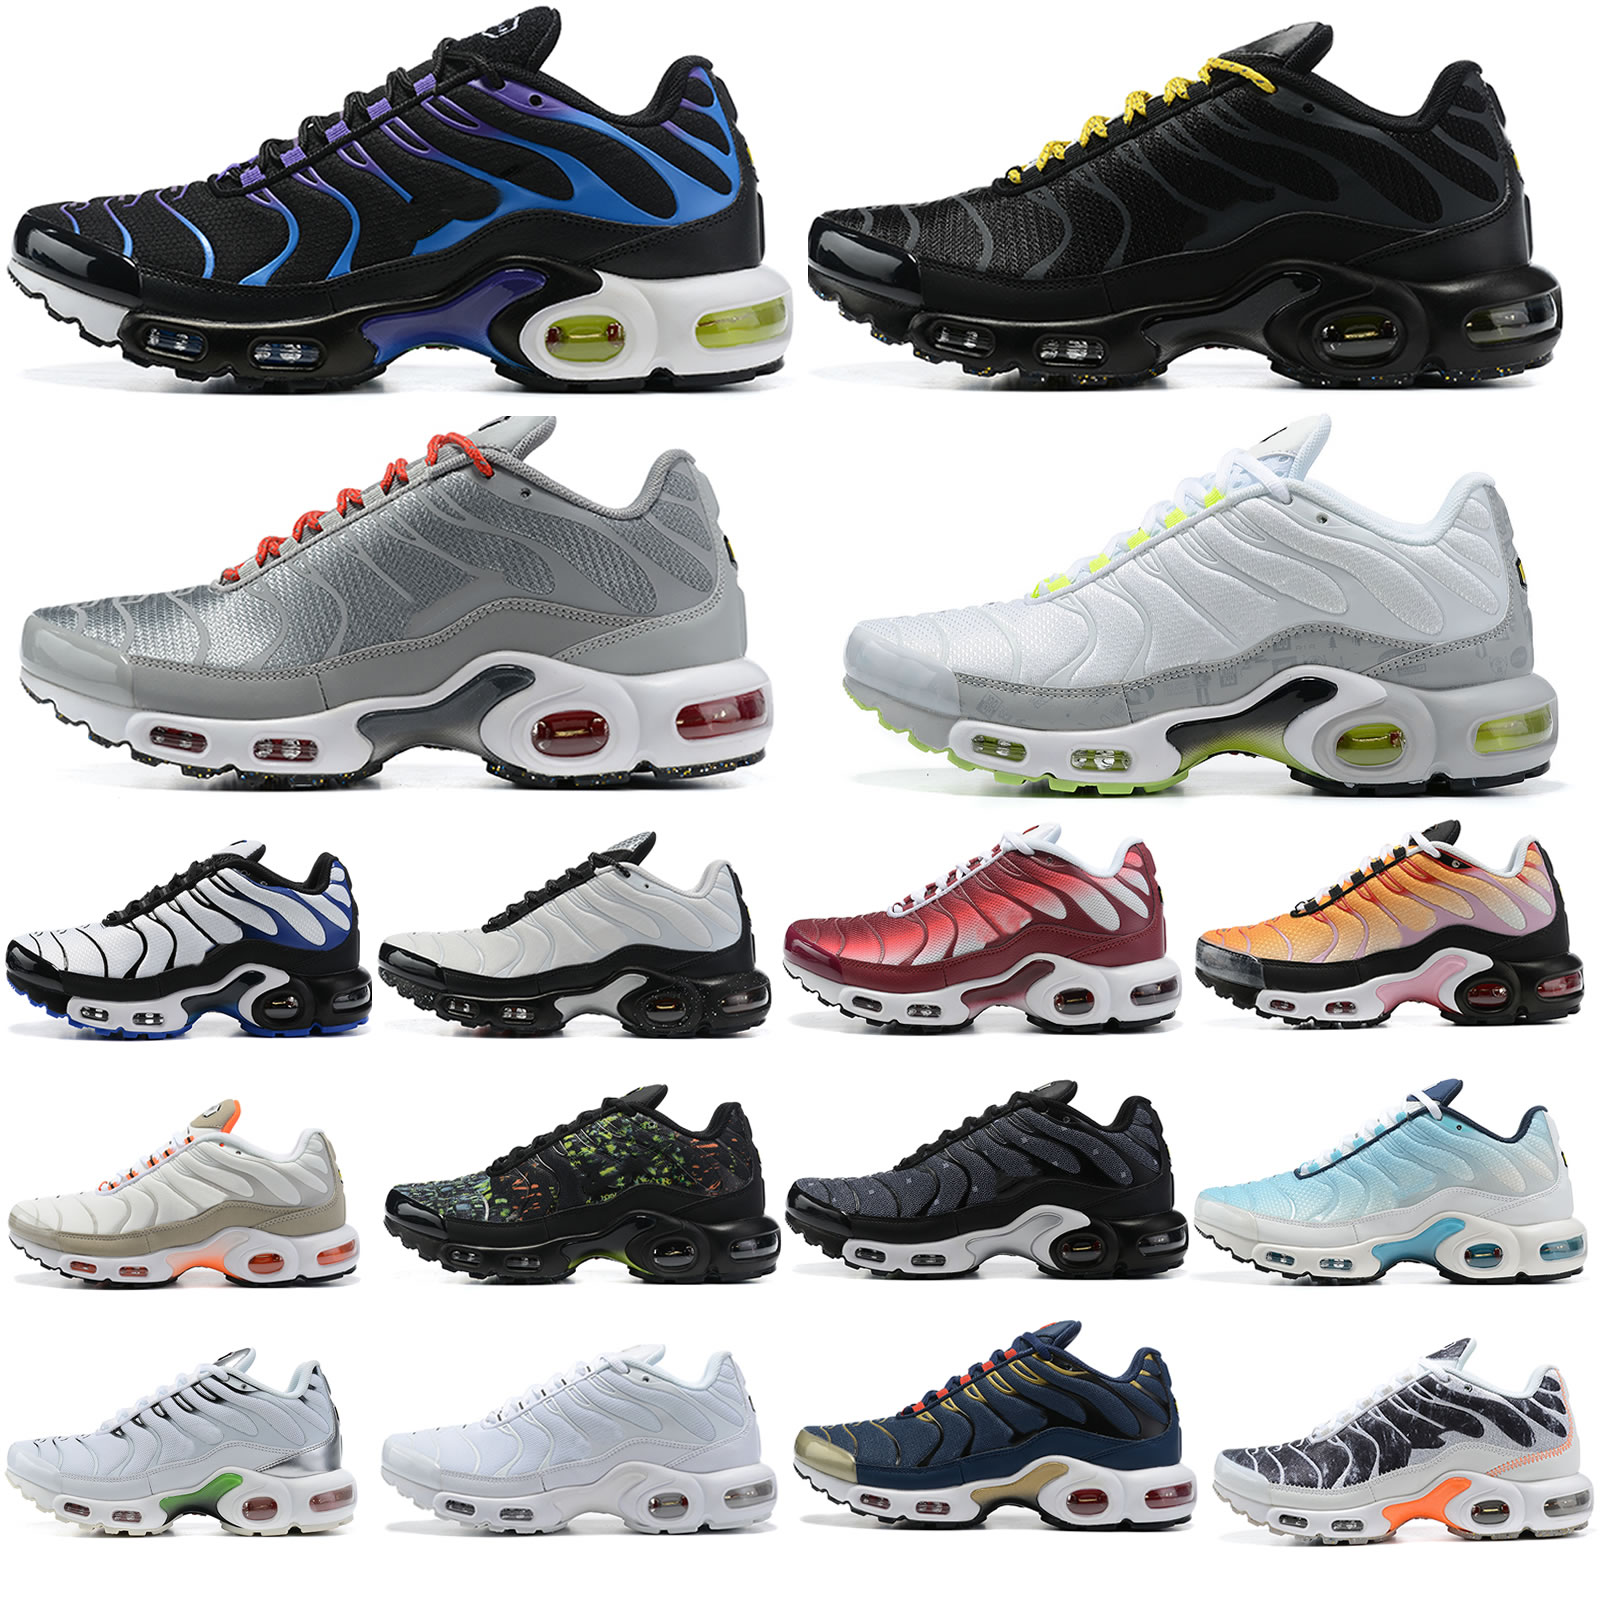 Image of Olive Reflective Tn Plus TNS Running Shoes Black Persian Violet Triple White GS DM Kaomoji Crater Kiss My Runner Shoe Mens Women Trainers Sneakers